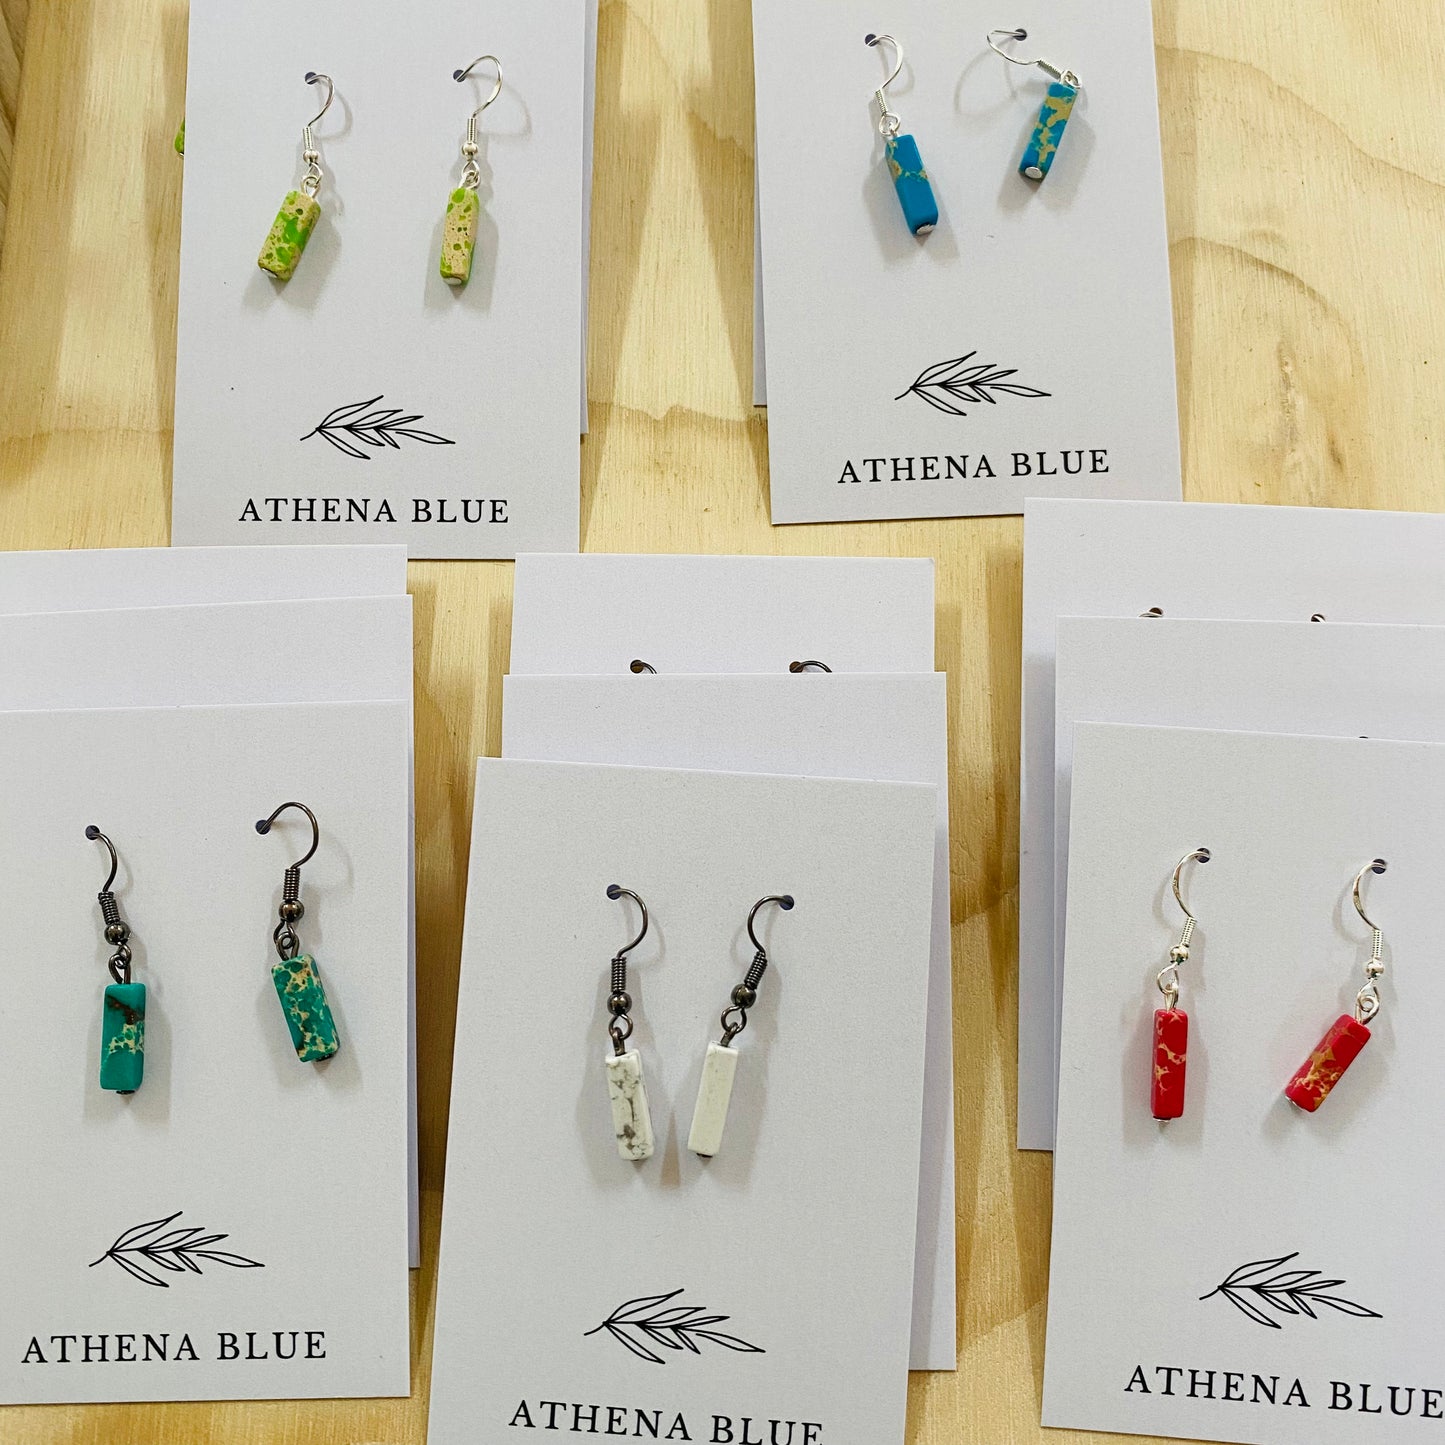 Stone Earrings by Athena Blue